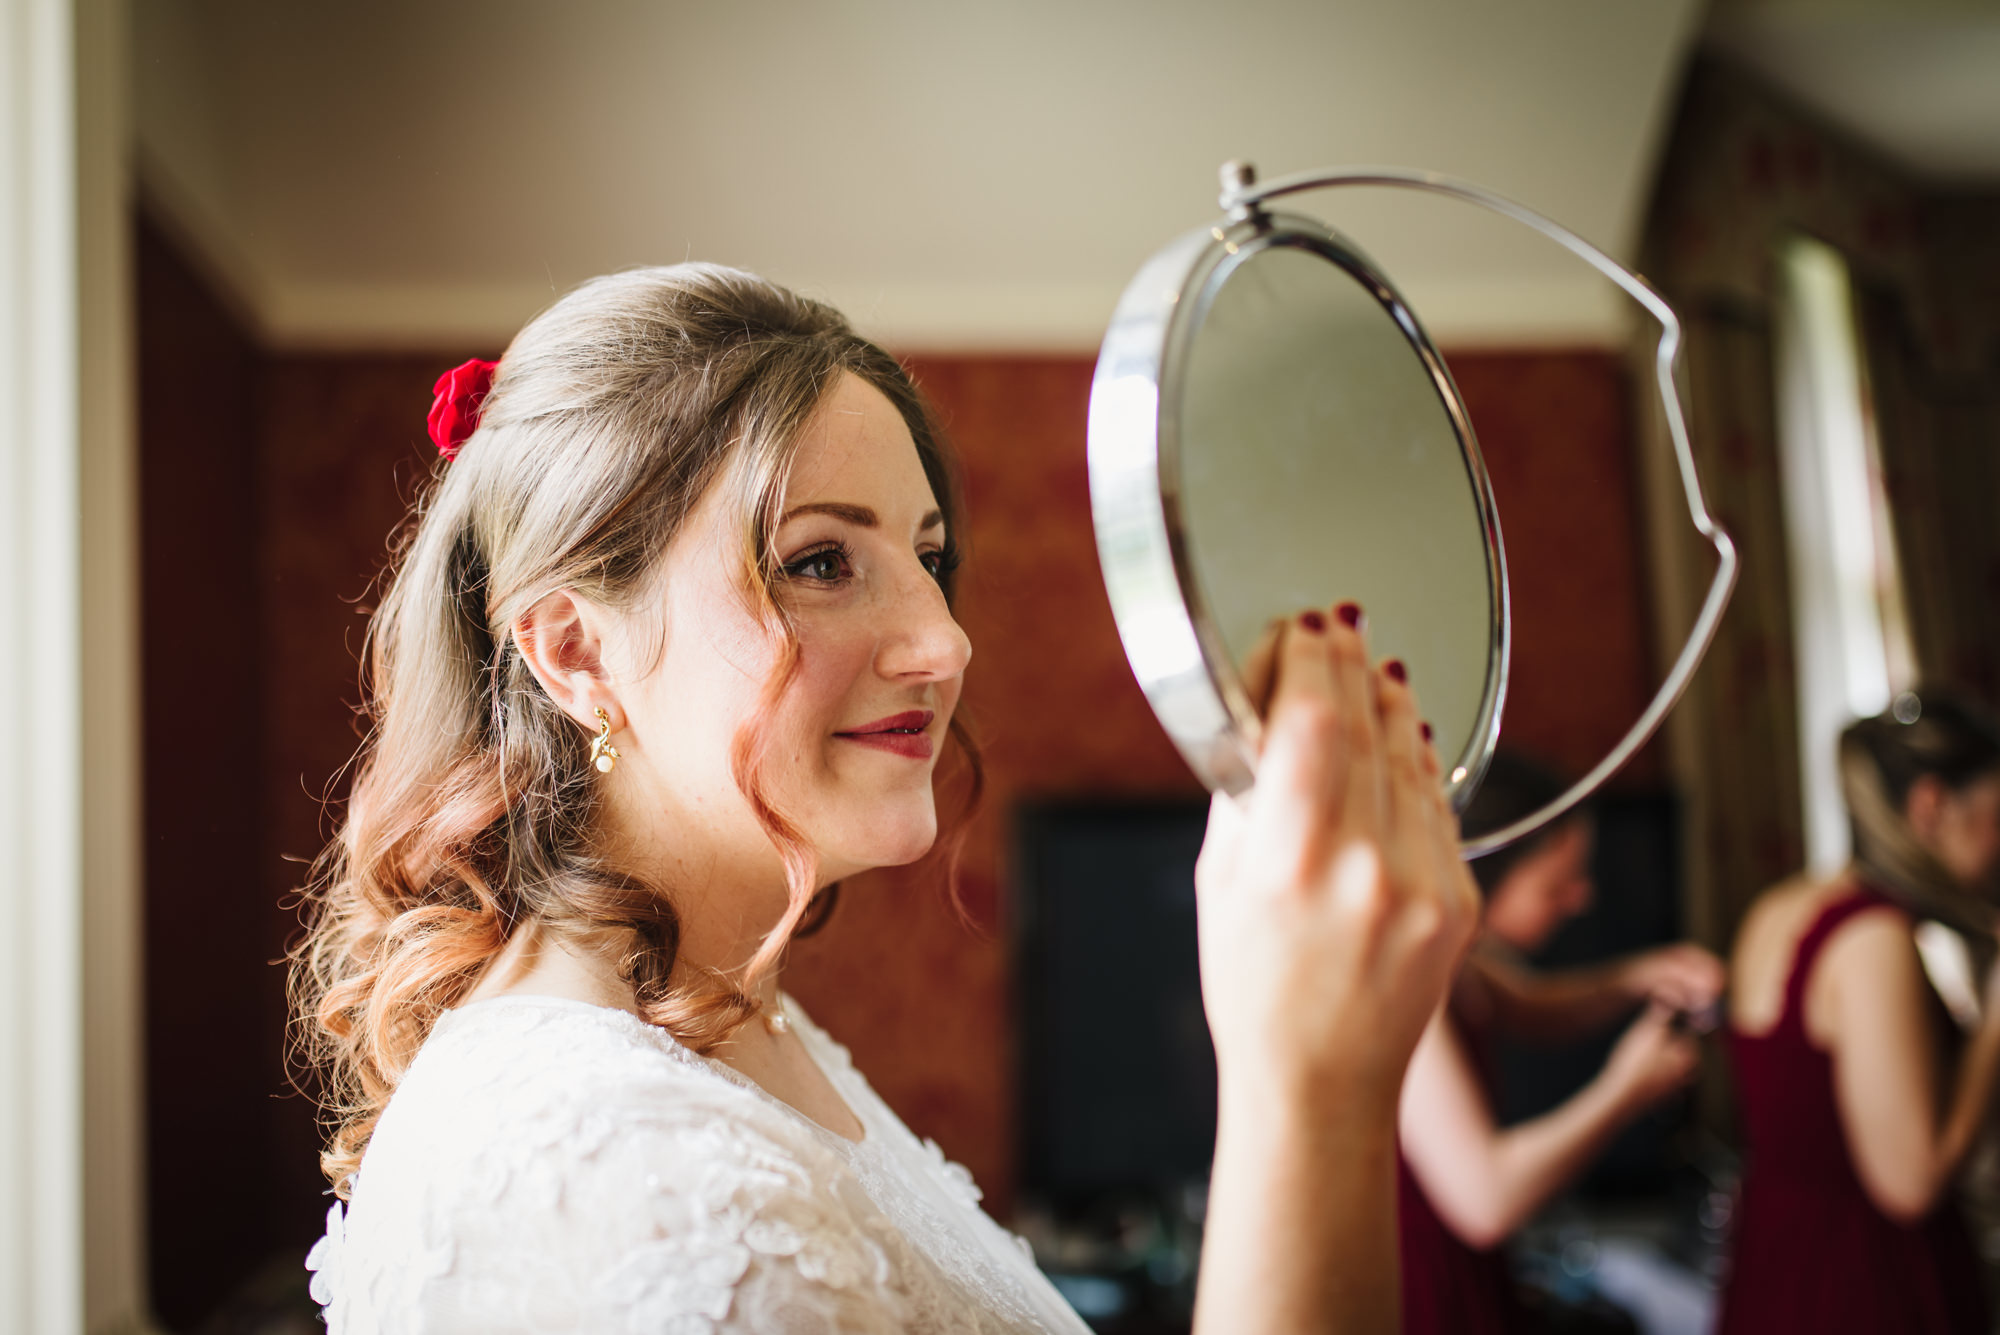 London weding photographer captures bride looking at herself in the mirror